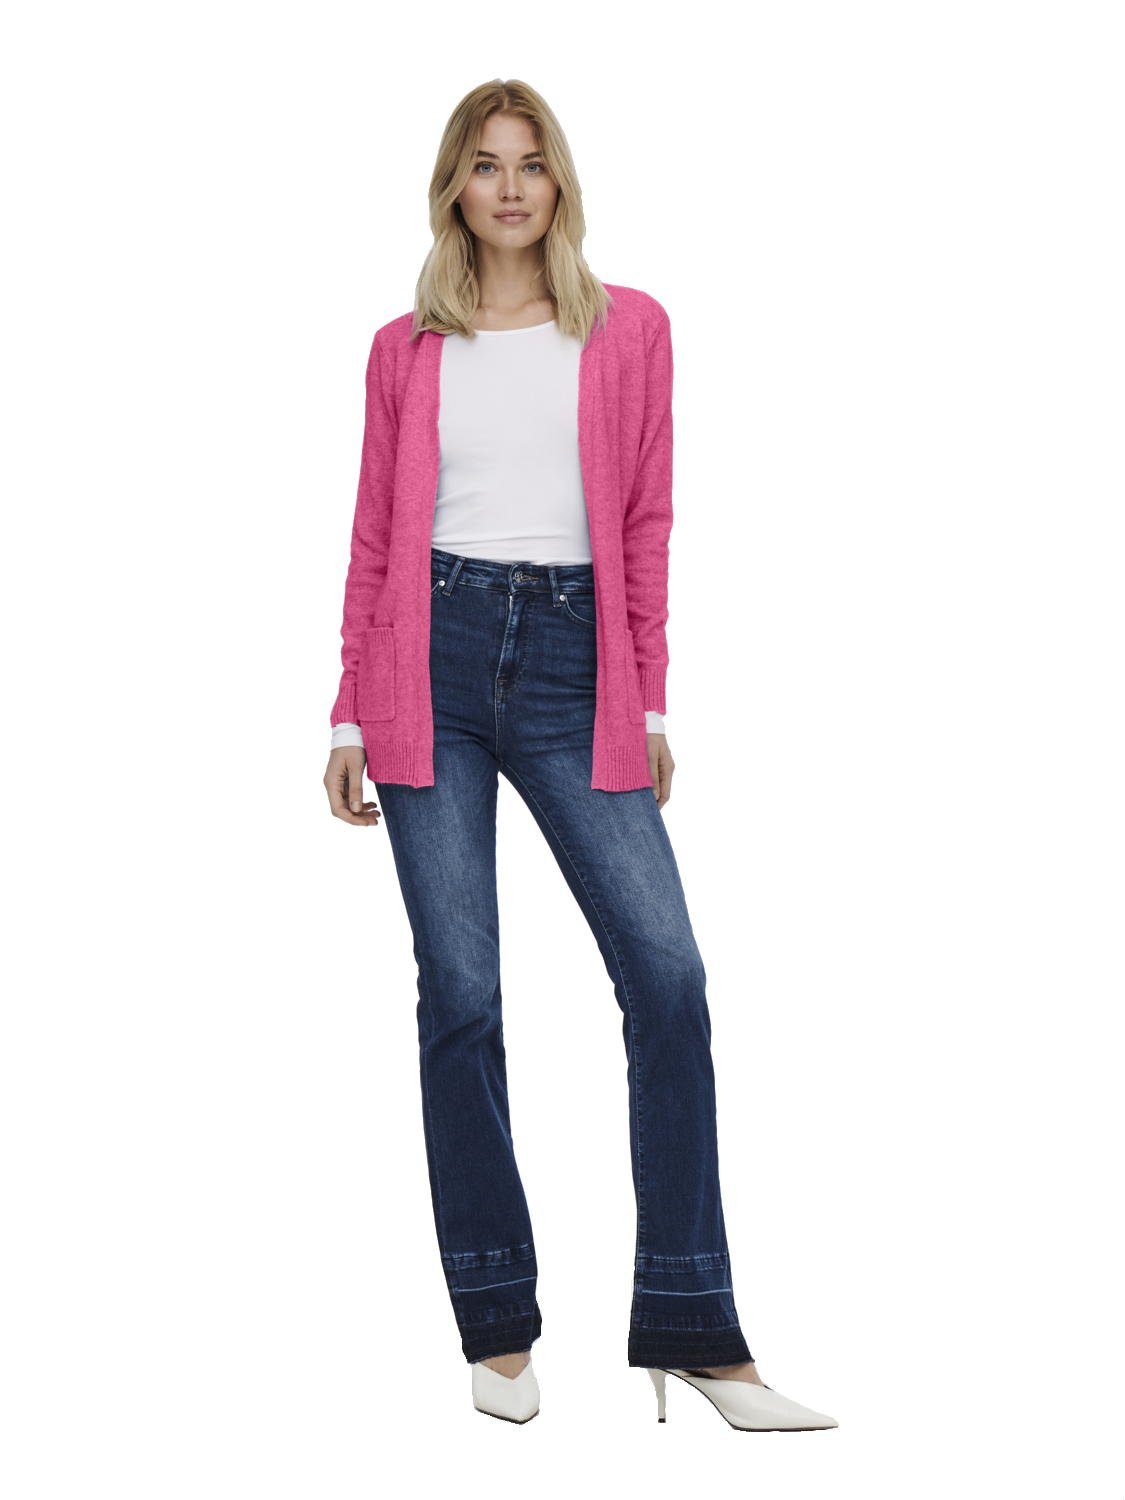 Pink Open Only OnlLesly - Damen offen female Knt Cardigan Strick-Jacke Cardigan ONLY